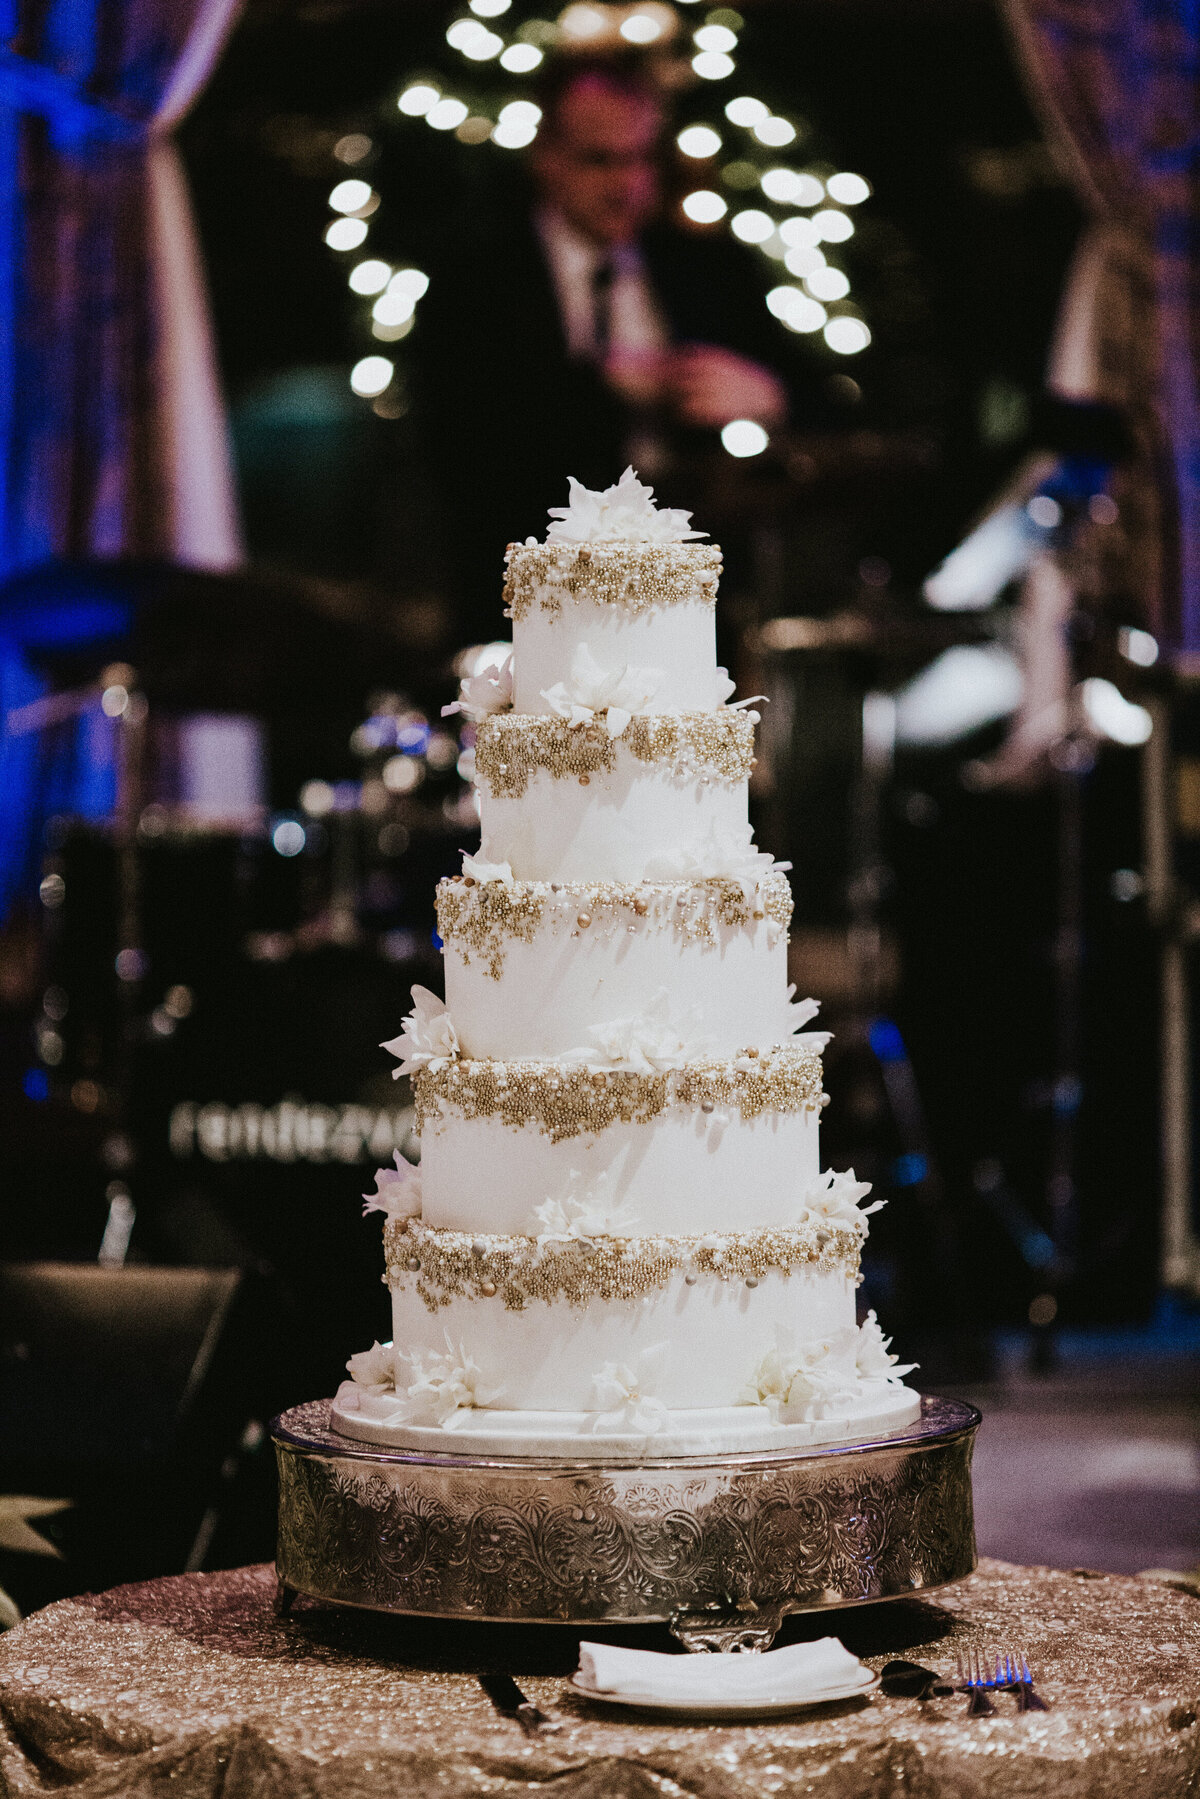 Five tier wedding cake with gold detailing